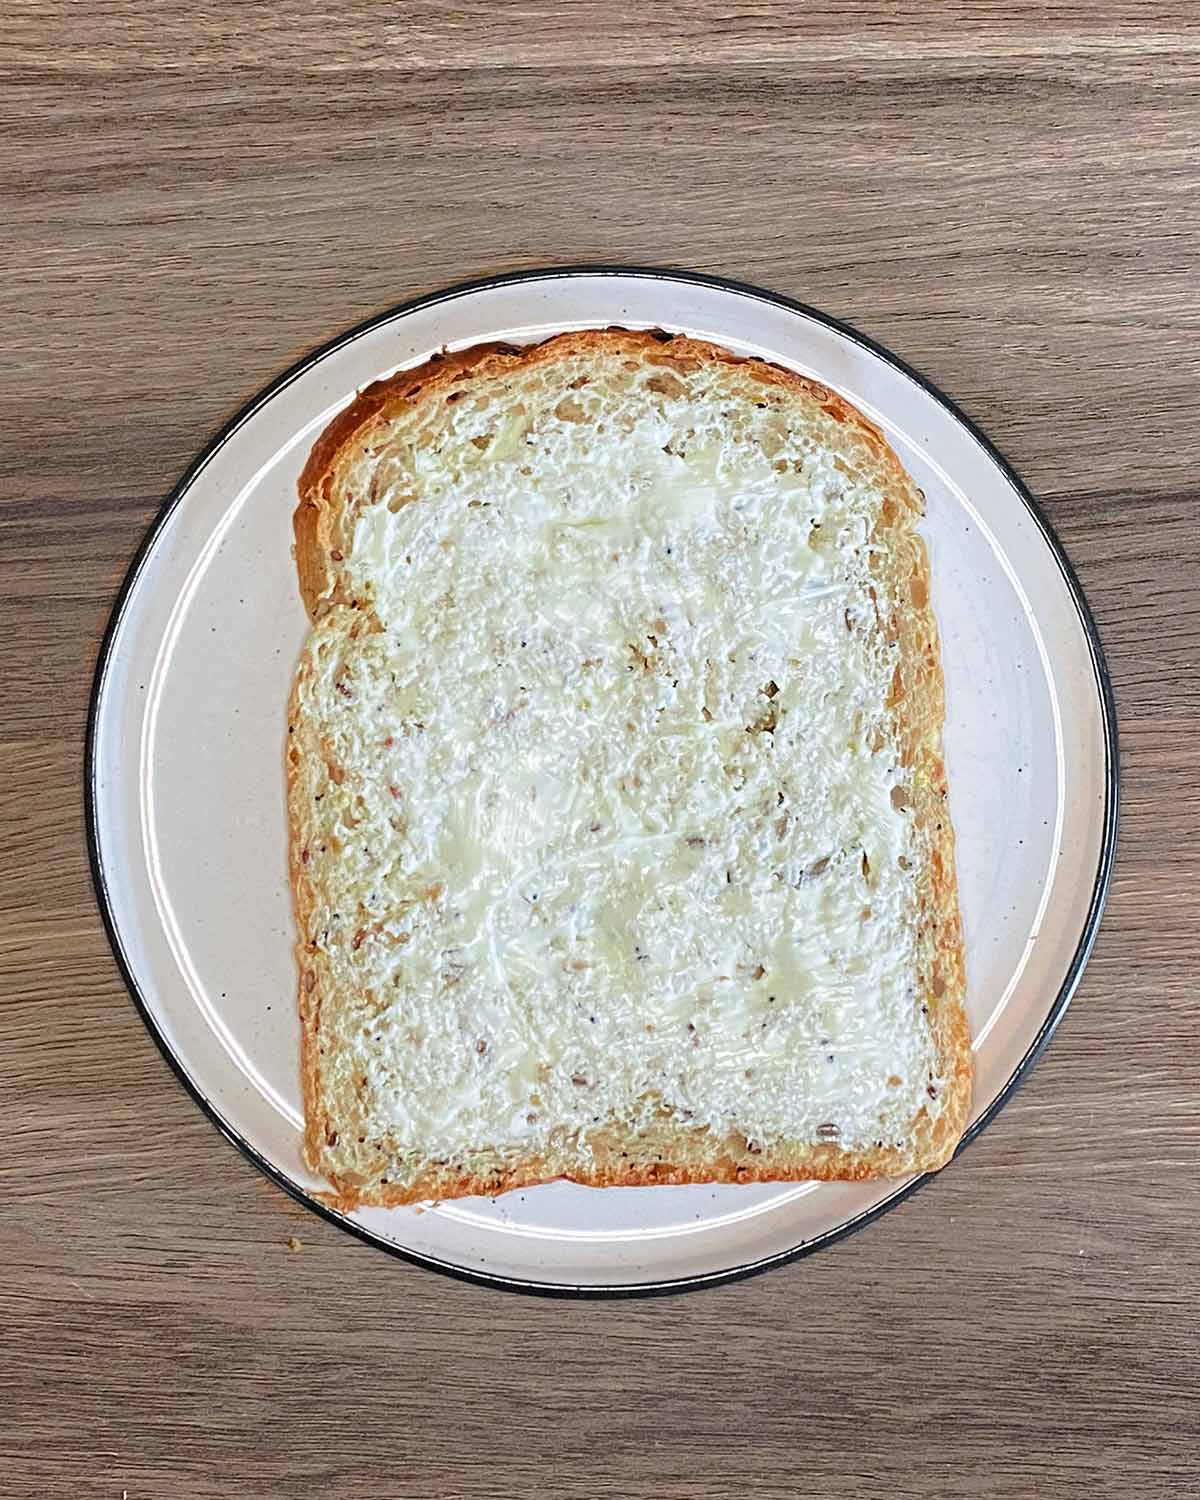 A slice of buttered bread.